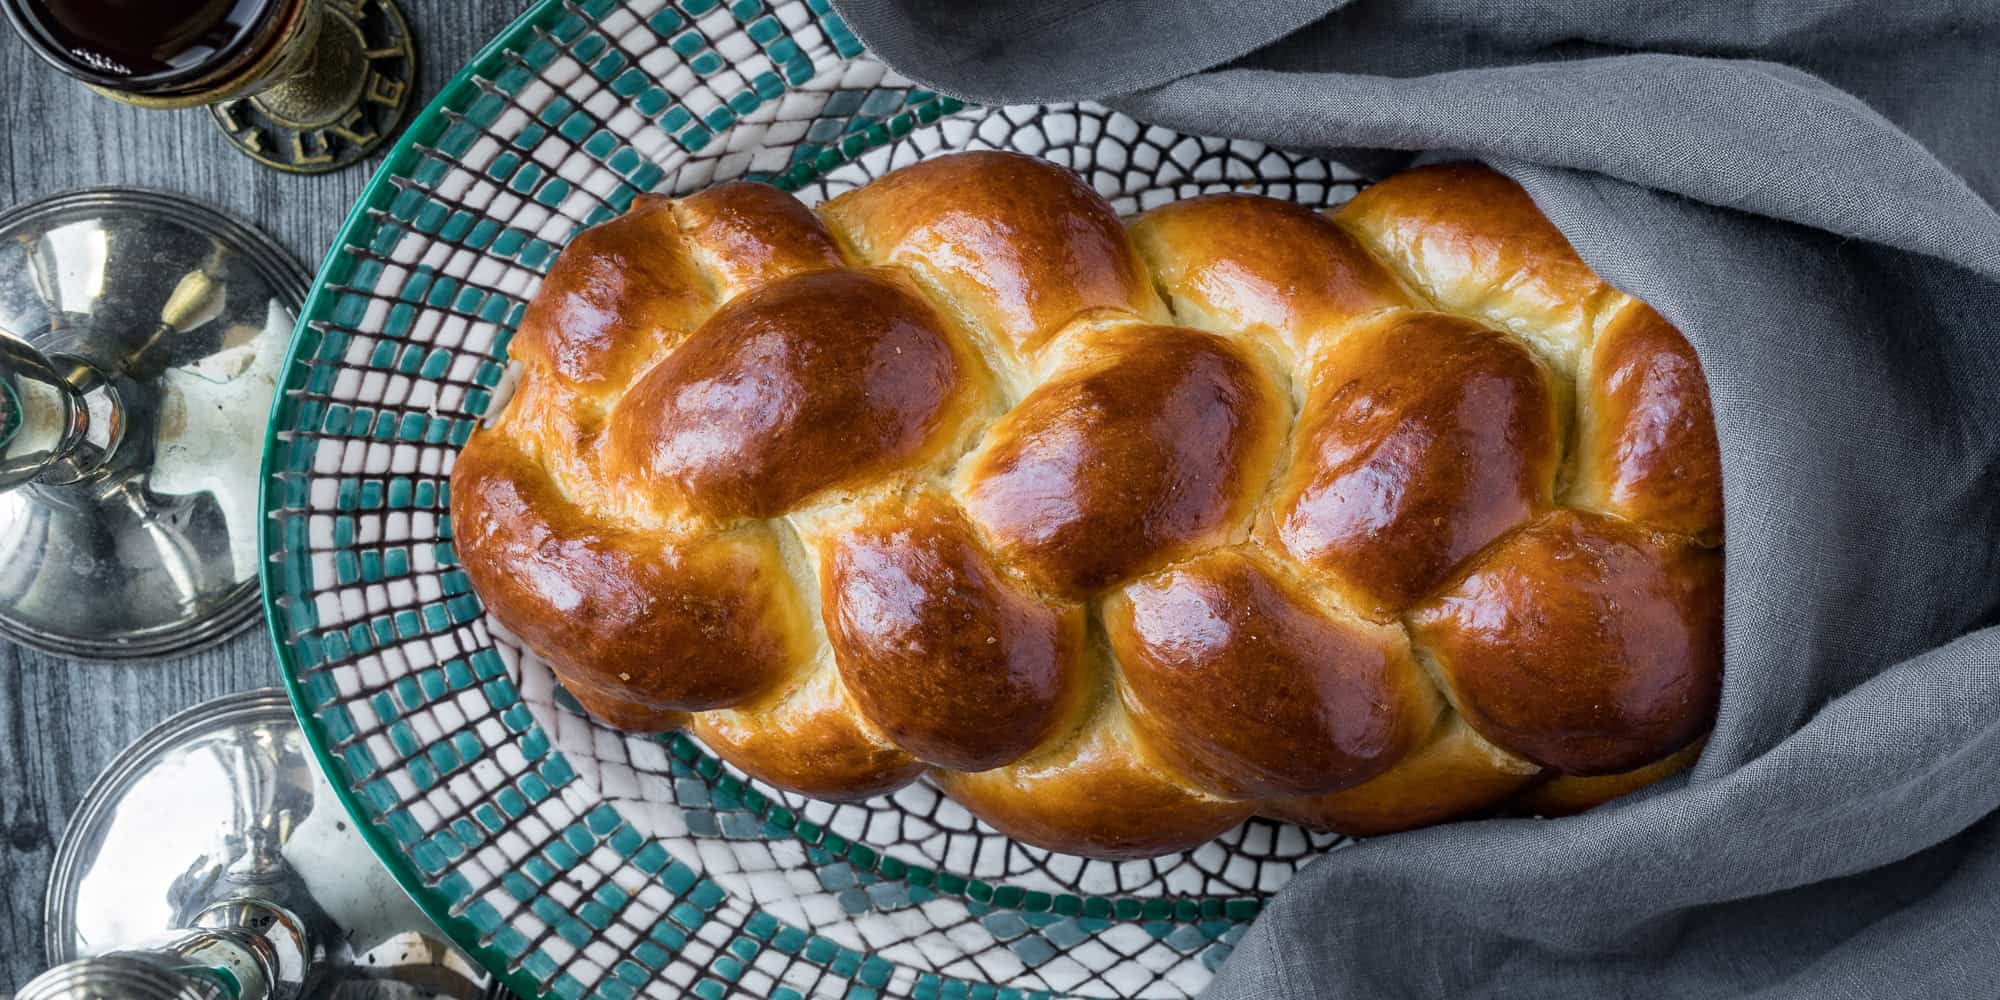 Light, fluffy, perfectly chewy challah recipe from Potluckiest.com